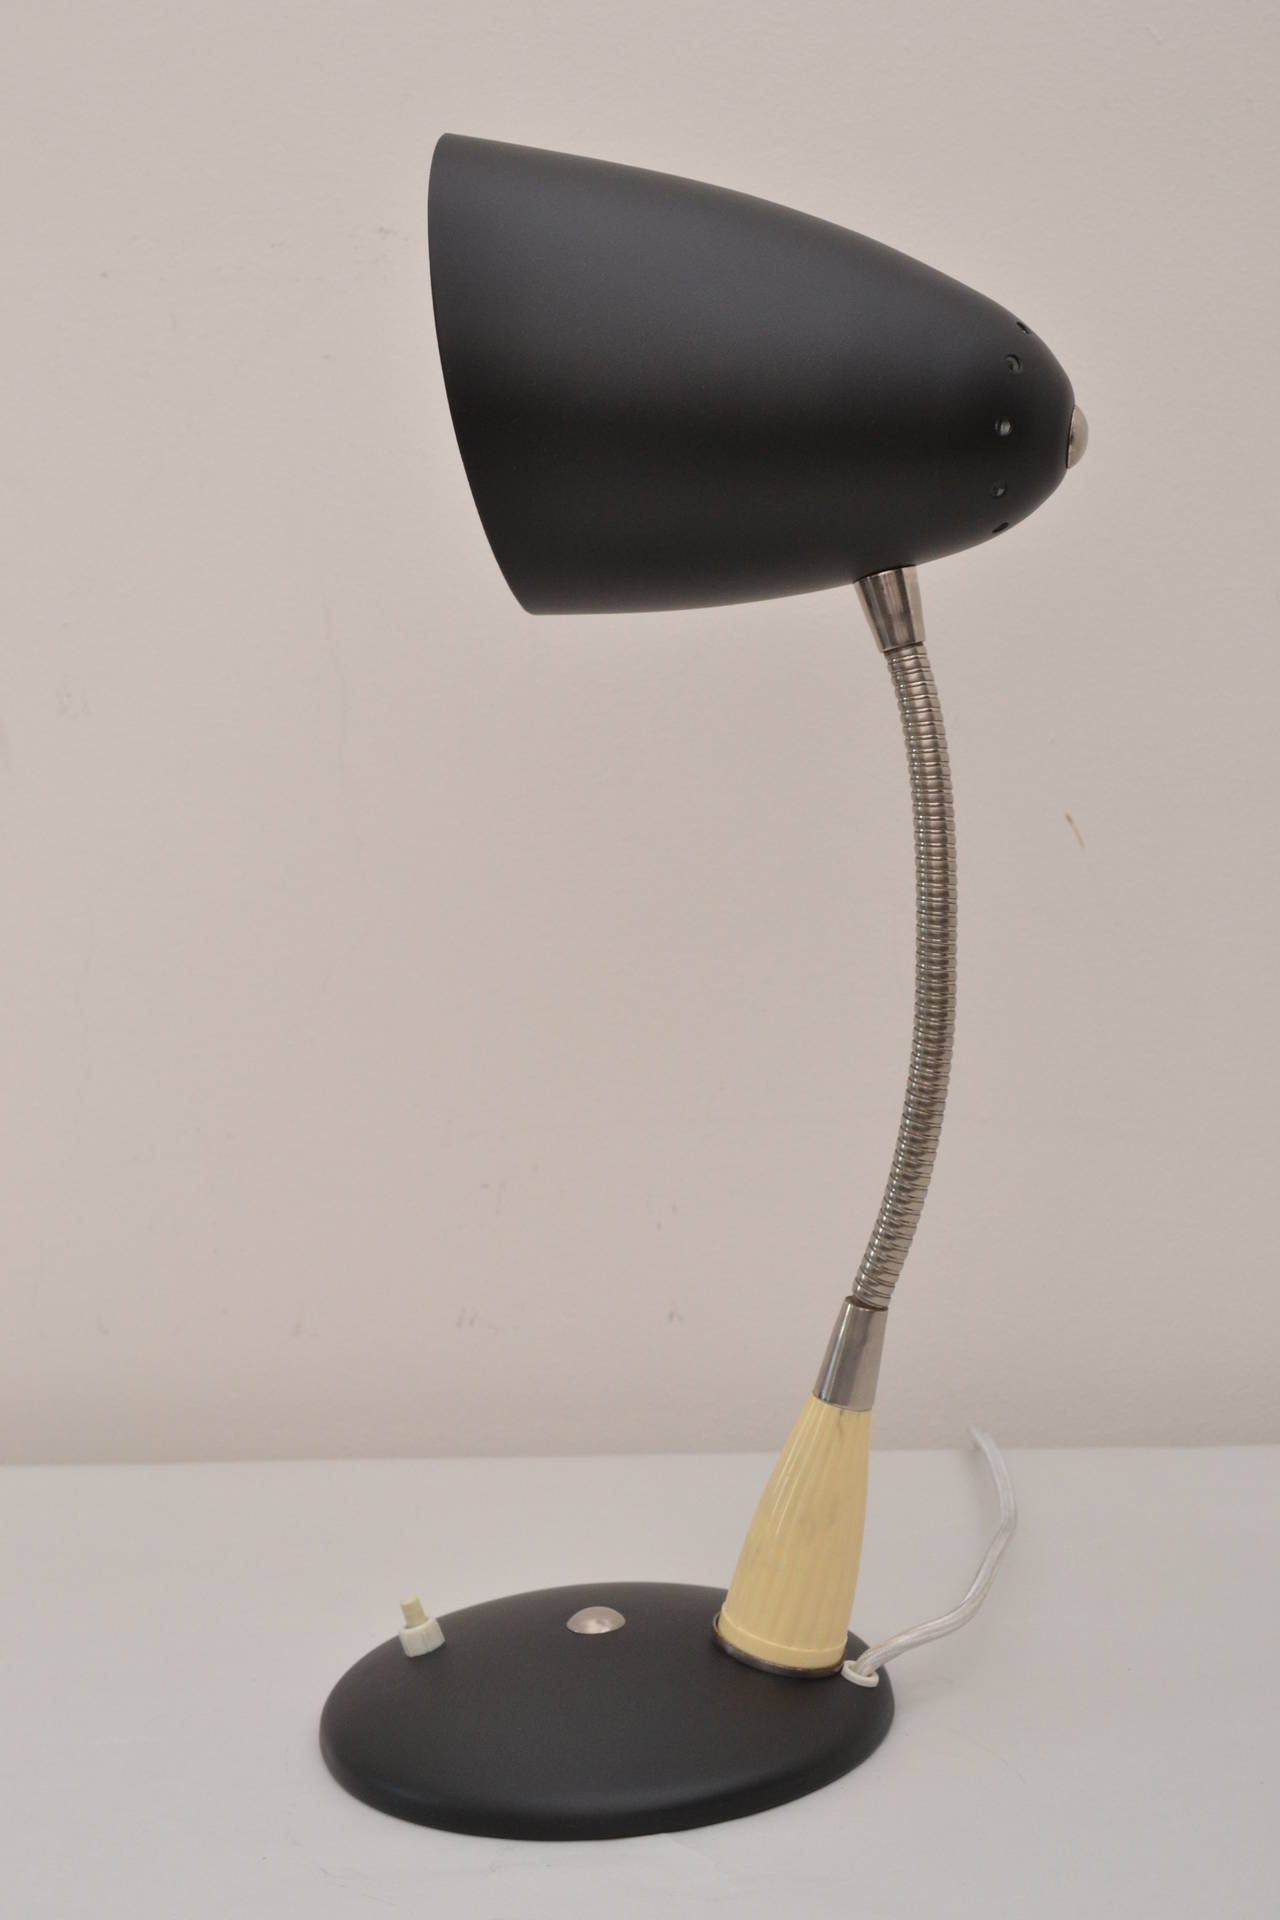 Adjustable table lamp, circa 1950 
Black lacquered